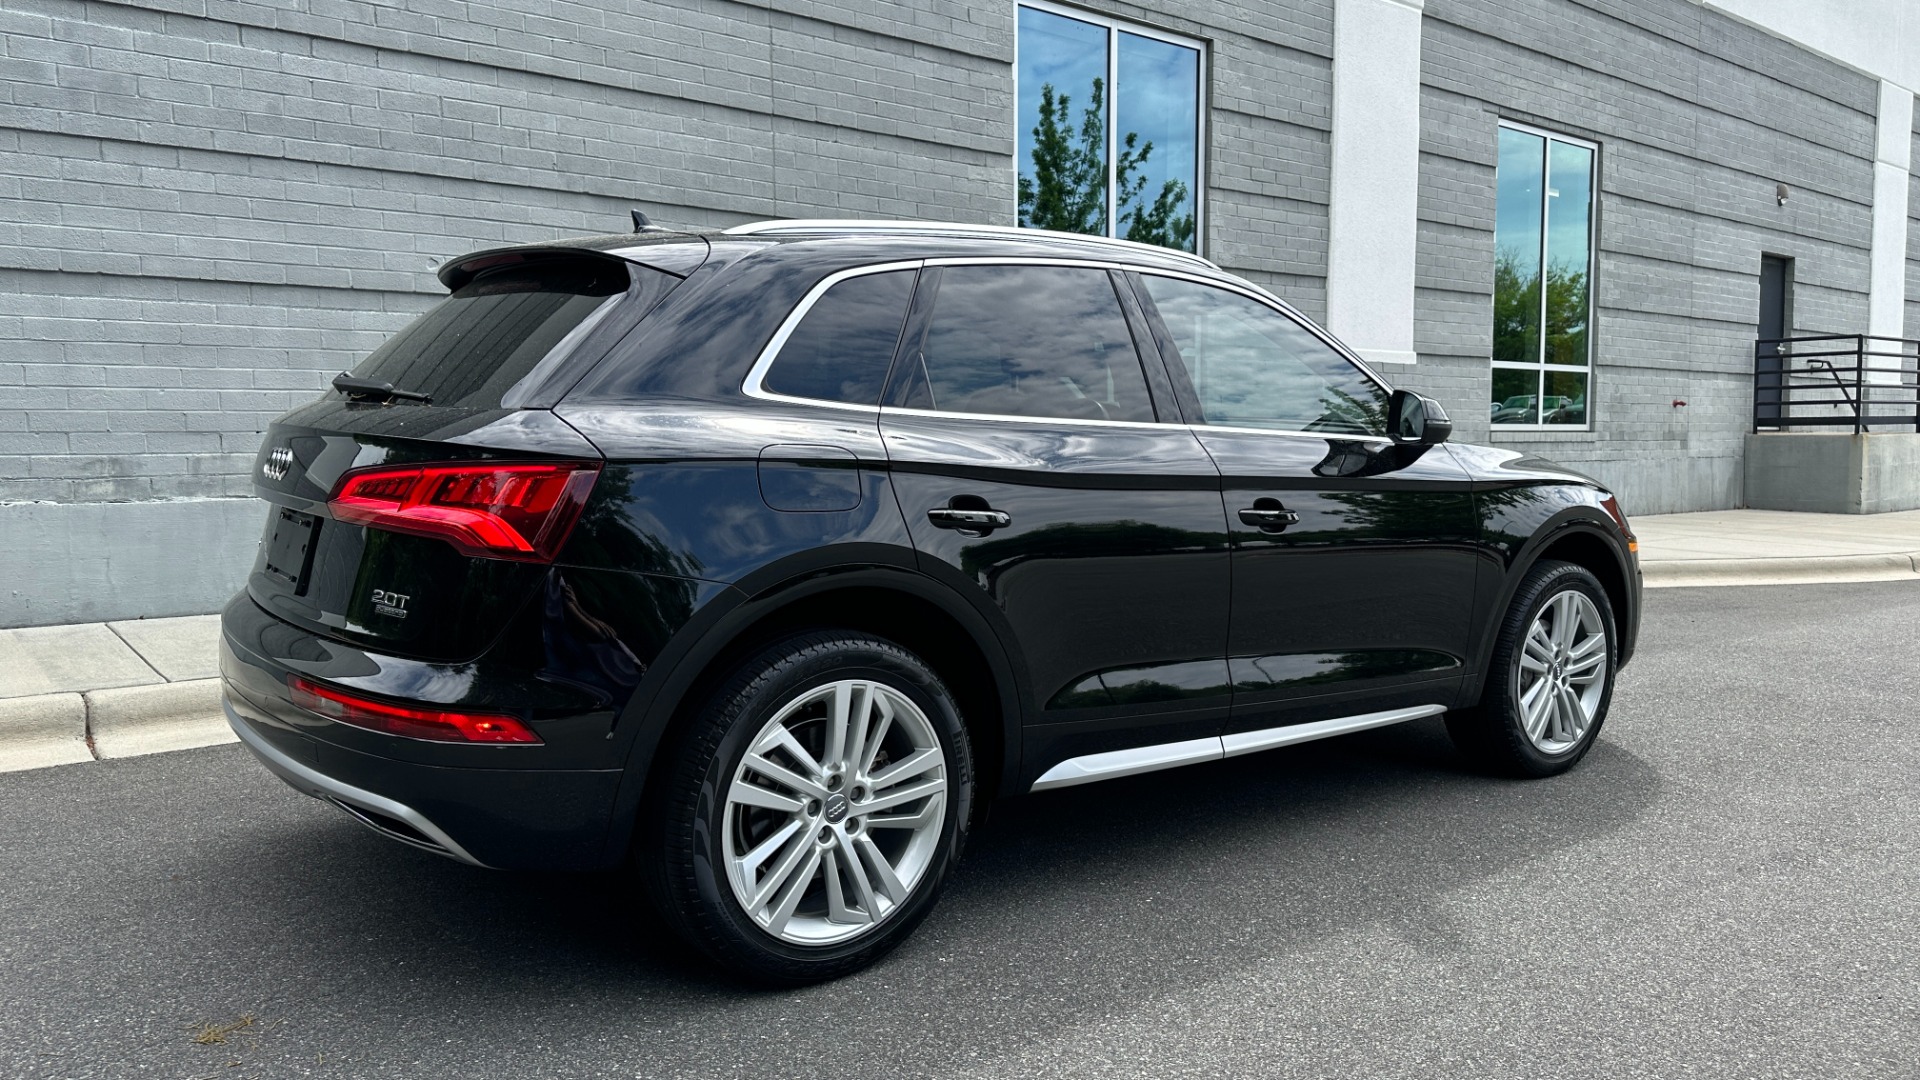 Used 2018 Audi Q5 PRESTIGE / DRIVER ASSISTANCE / COLD WEATHER / WOOD INLAYS for sale $25,995 at Formula Imports in Charlotte NC 28227 8